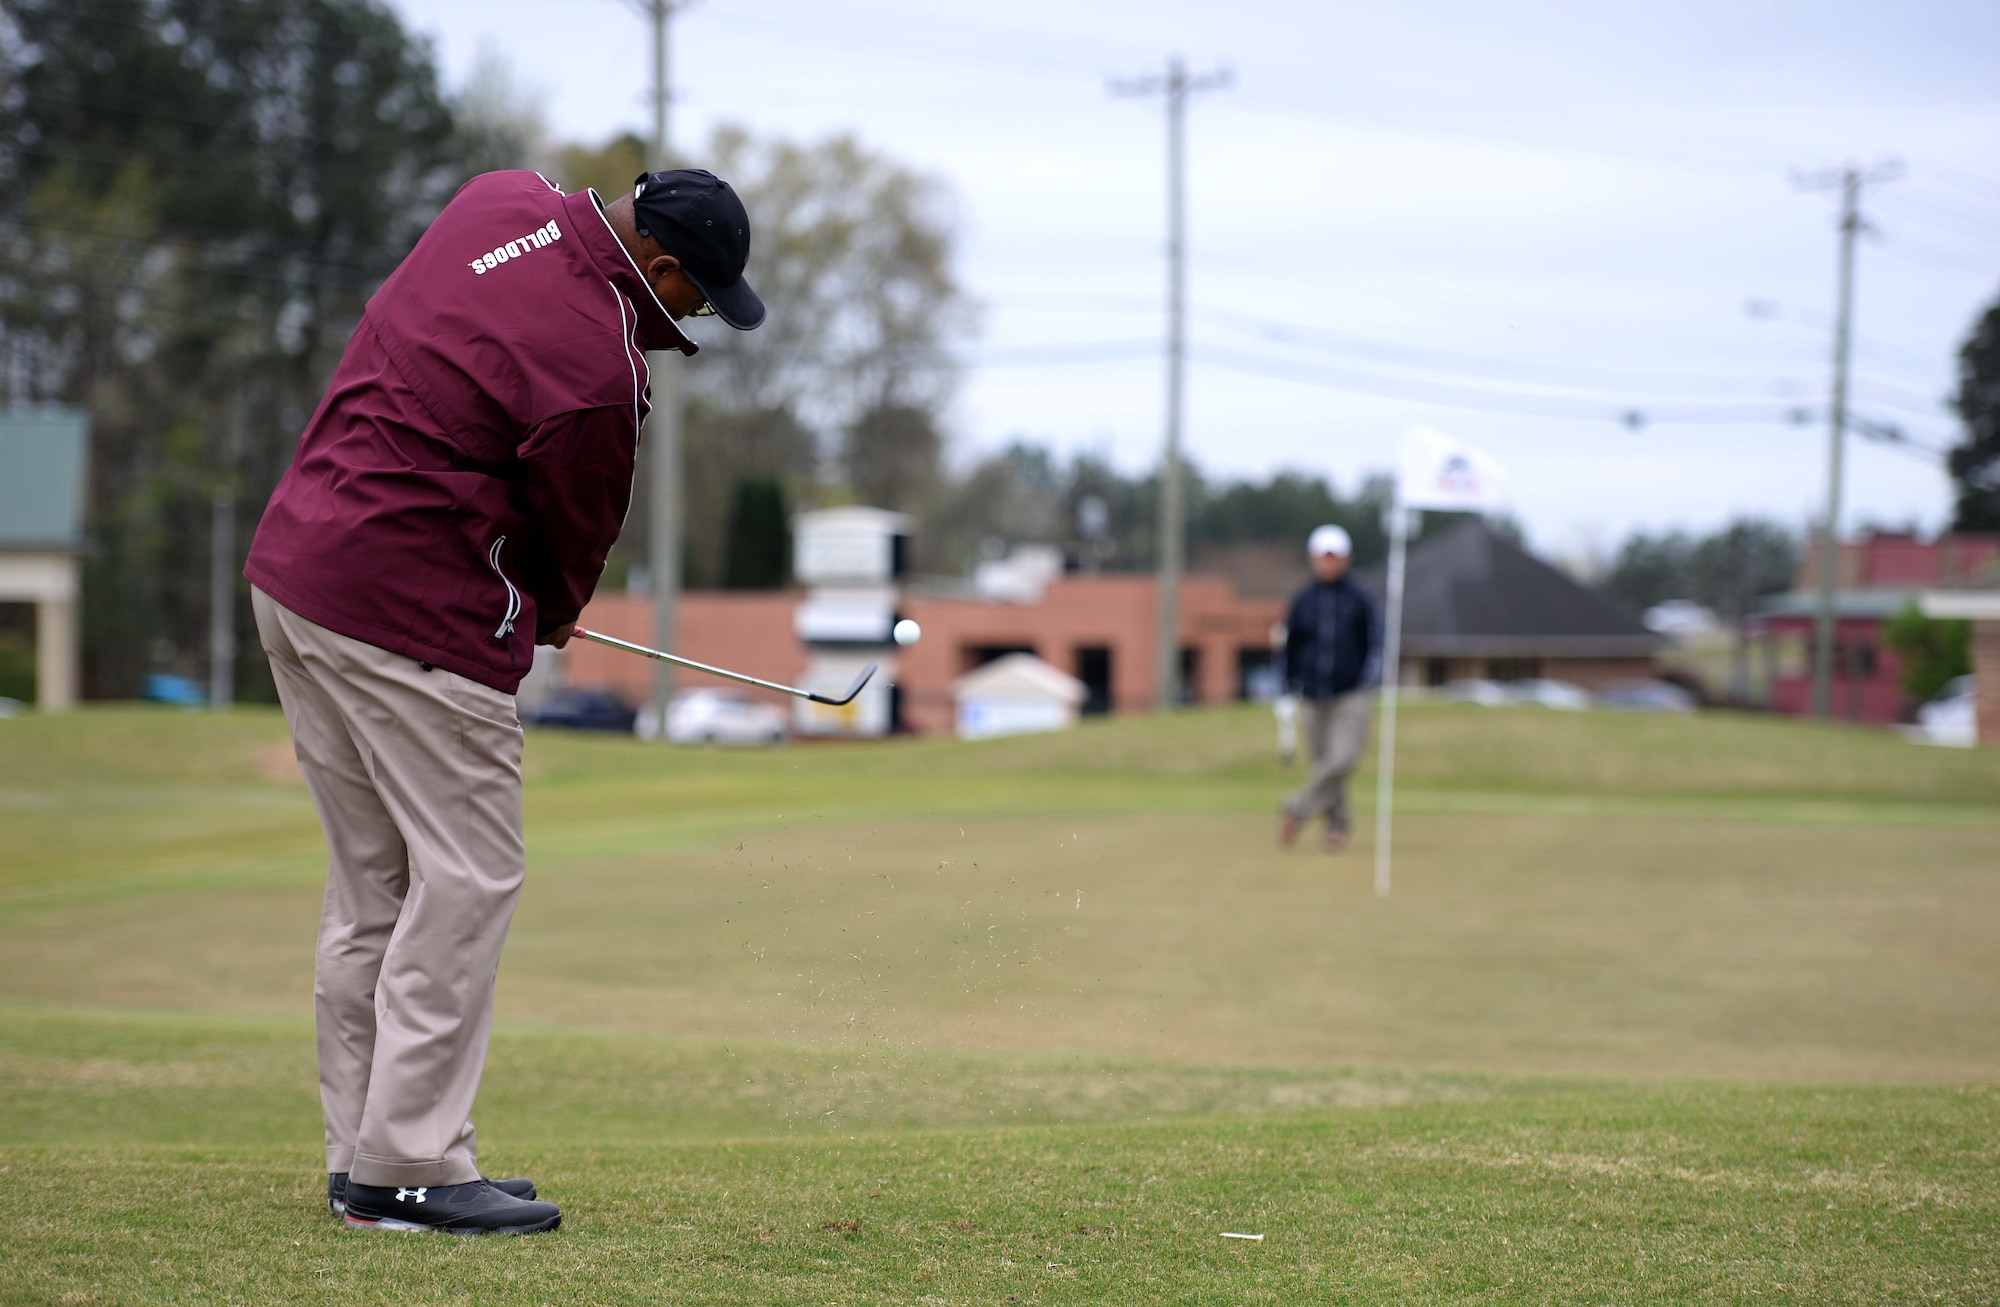 Milton Rawl chips on the 8th hole March 26, 2018 at Lion Hills Columbus Country Club in Columbus, Mississippi. Rawl was participating in the Happy Irby Golf Tournament fundraiser, focused on helping donate items to children in need across the local community. (U.S. Air Force photo by Airman 1st Class Keith Holcomb)